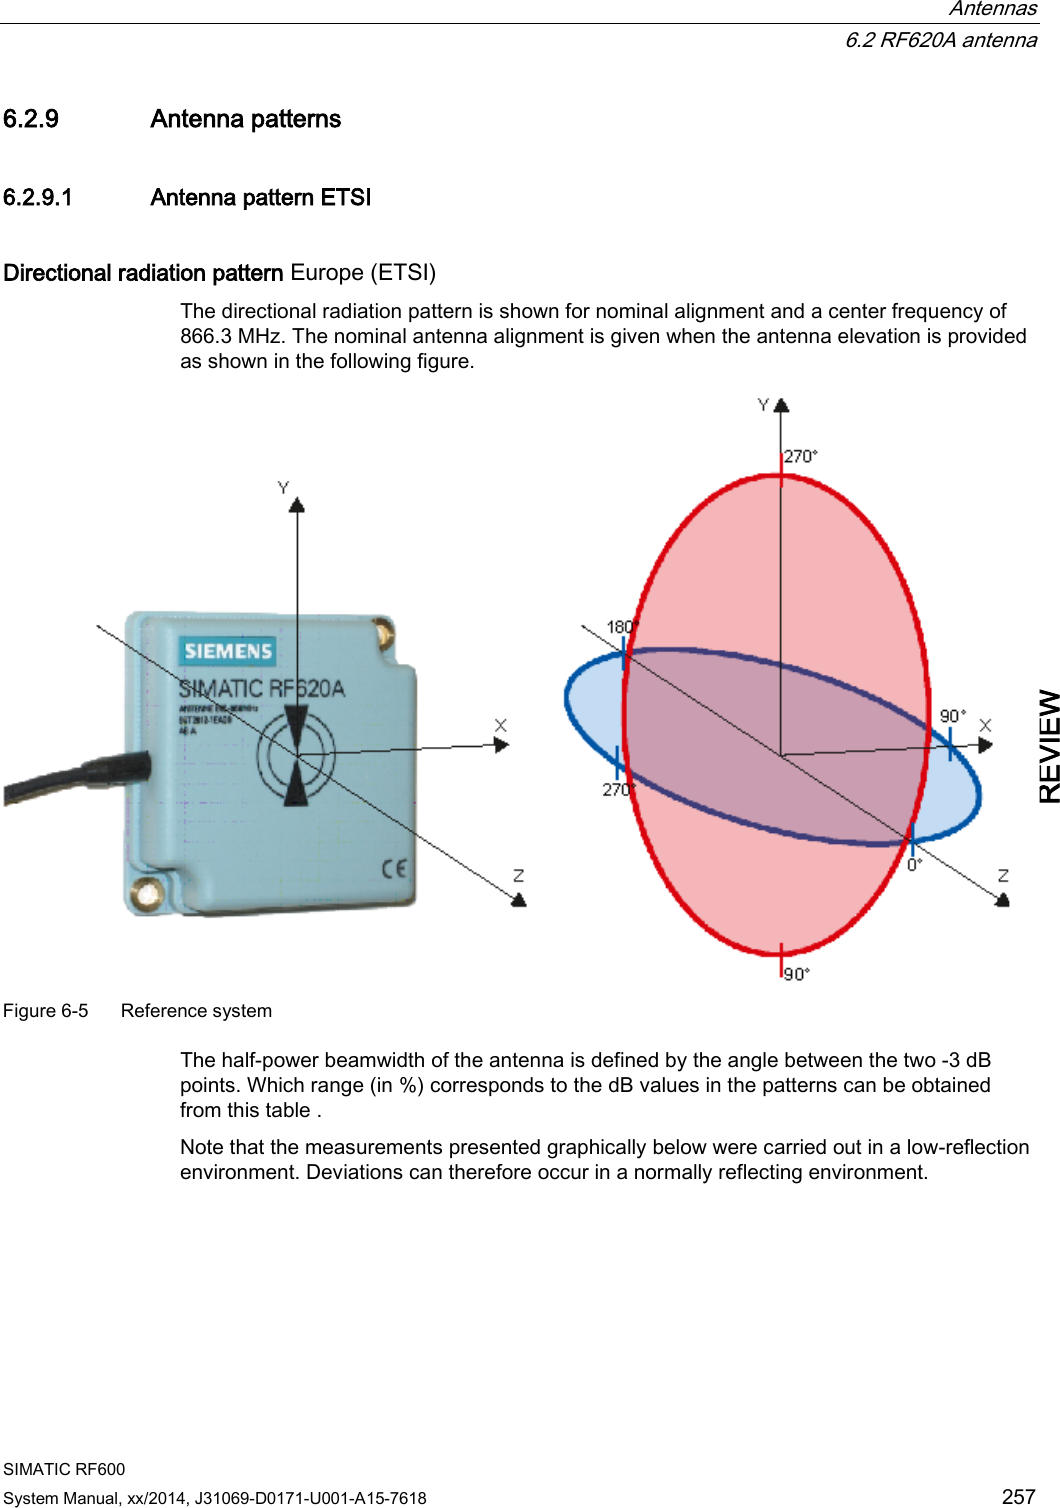  Antennas  6.2 RF620A antenna SIMATIC RF600 System Manual, xx/2014, J31069-D0171-U001-A15-7618 257 REVIEW 6.2.9 Antenna patterns 6.2.9.1 Antenna pattern ETSI Directional radiation pattern Europe (ETSI) The directional radiation pattern is shown for nominal alignment and a center frequency of 866.3 MHz. The nominal antenna alignment is given when the antenna elevation is provided as shown in the following figure.   Figure 6-5  Reference system The half-power beamwidth of the antenna is defined by the angle between the two -3 dB points. Which range (in %) corresponds to the dB values in the patterns can be obtained from this table . Note that the measurements presented graphically below were carried out in a low-reflection environment. Deviations can therefore occur in a normally reflecting environment. 